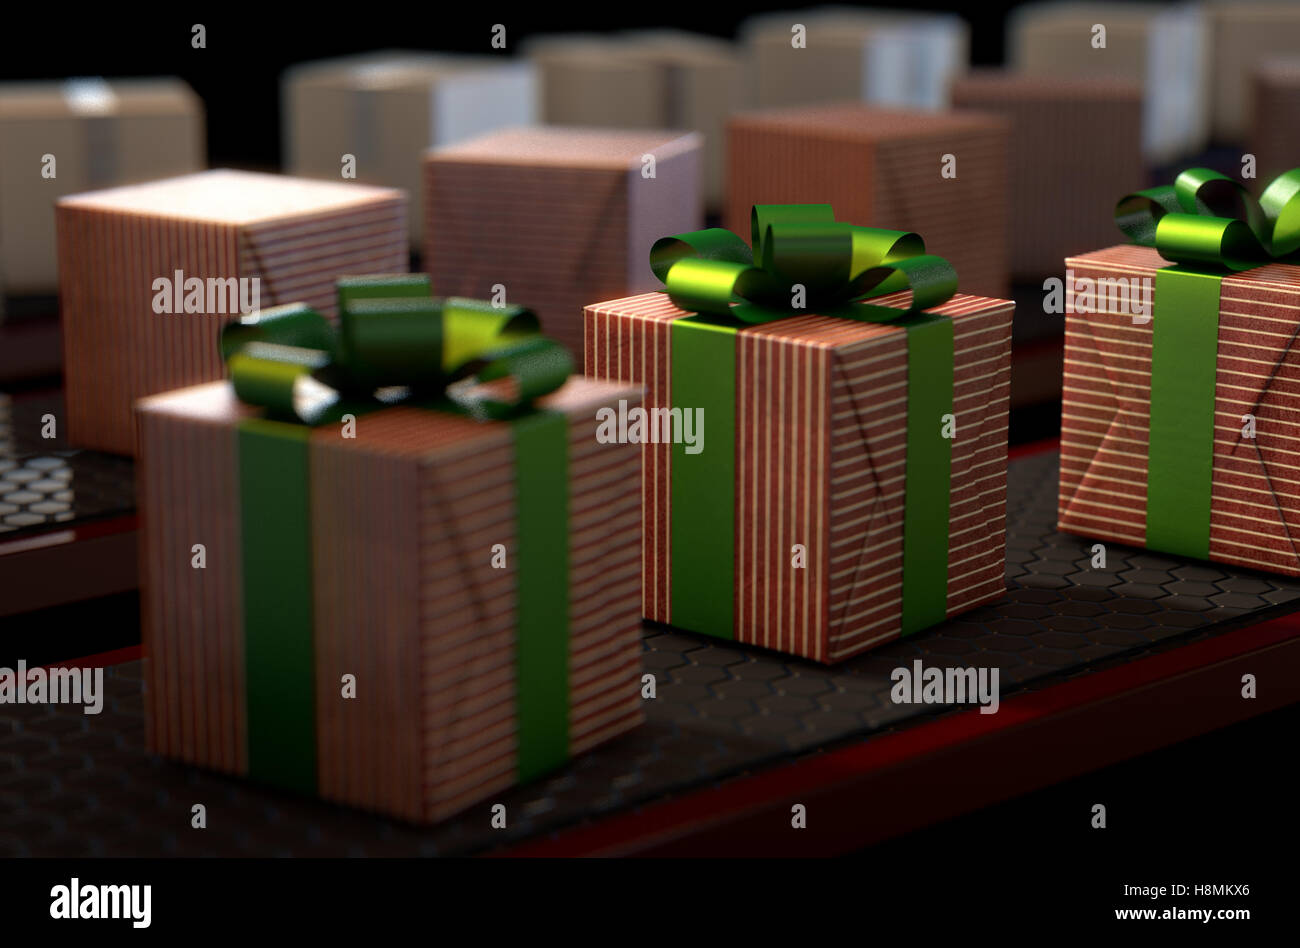 A 3D render of a production line of Christmas gift boxes in varying stages of wrapping on conveyor belts Stock Photo